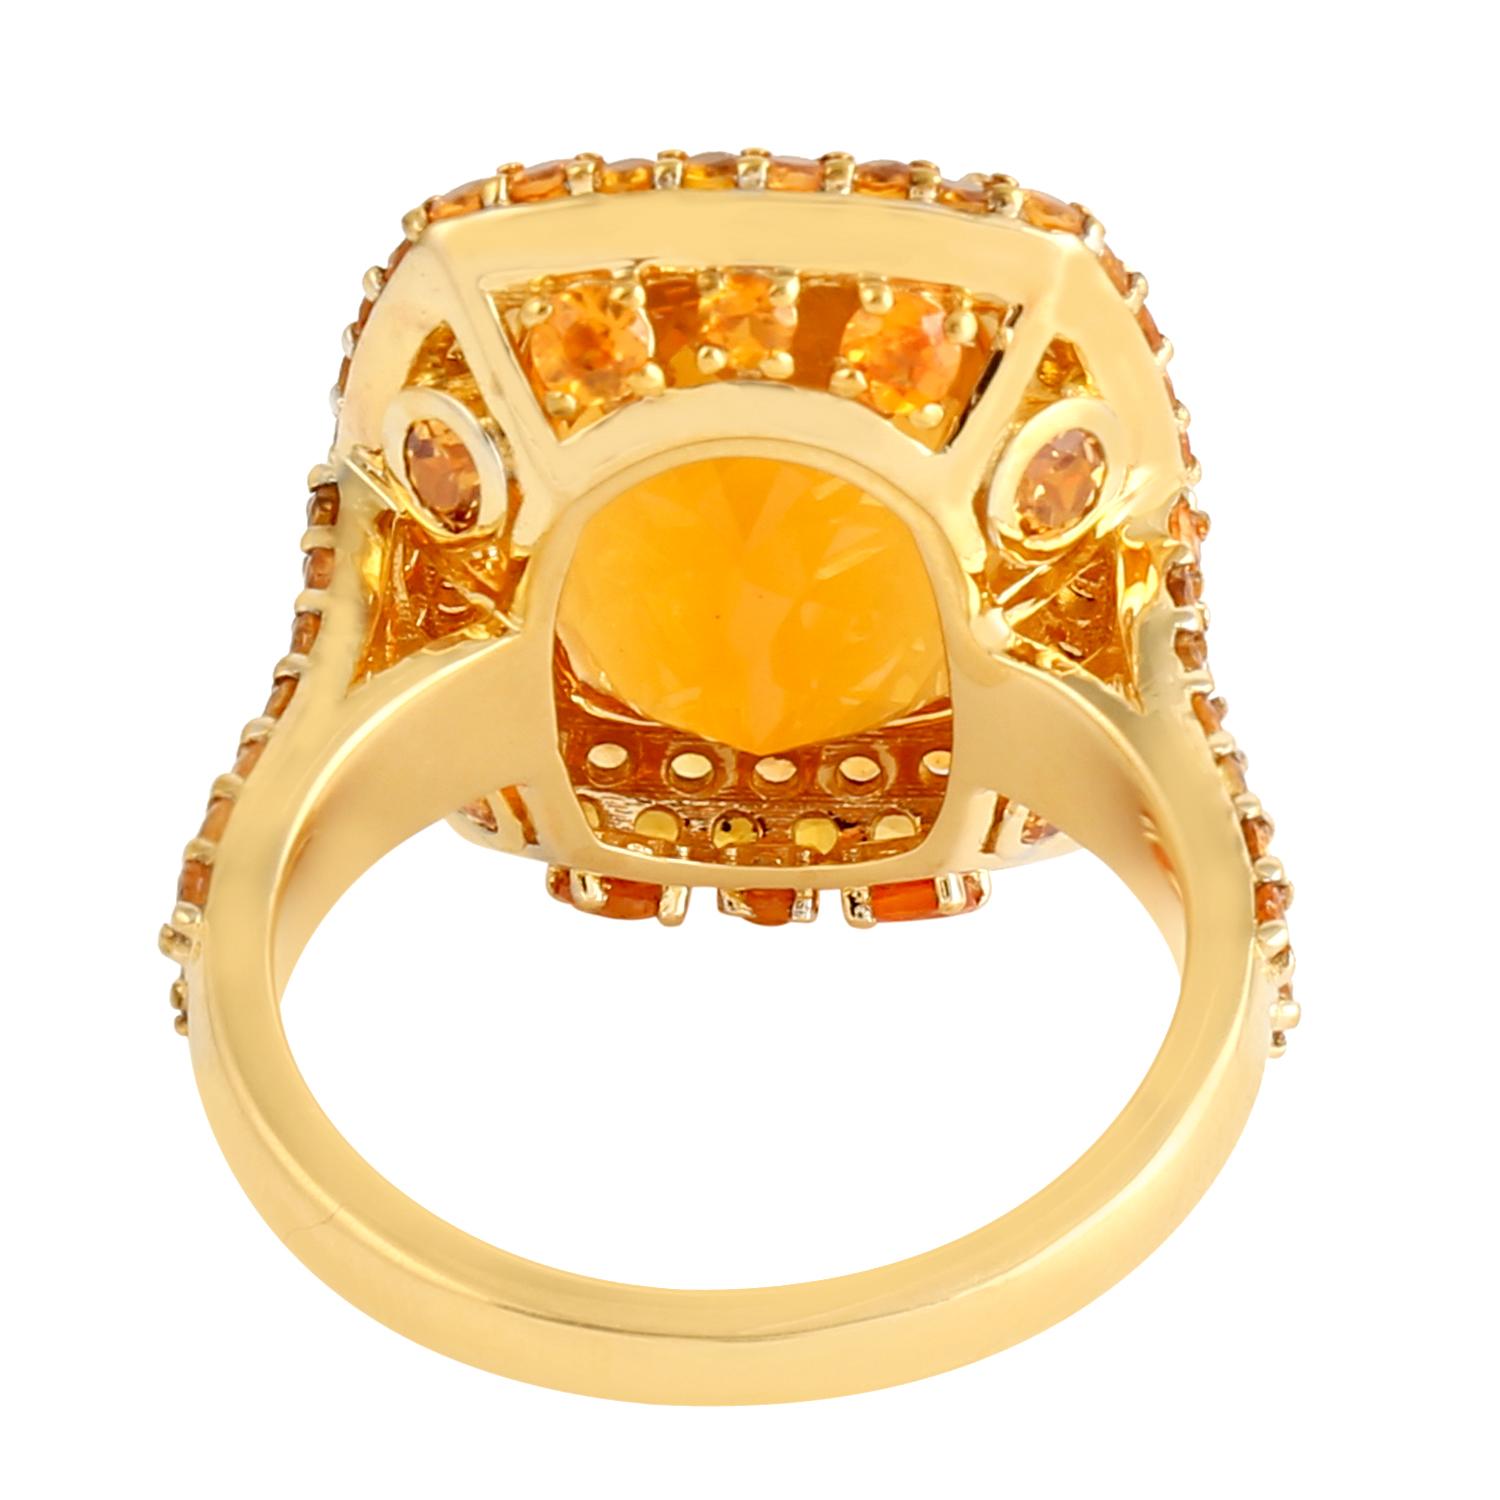 Art Deco Cushion Shaped Fire Opal Cocktail Ring w/ Garnet & Diamonds Made In 18k Gold For Sale